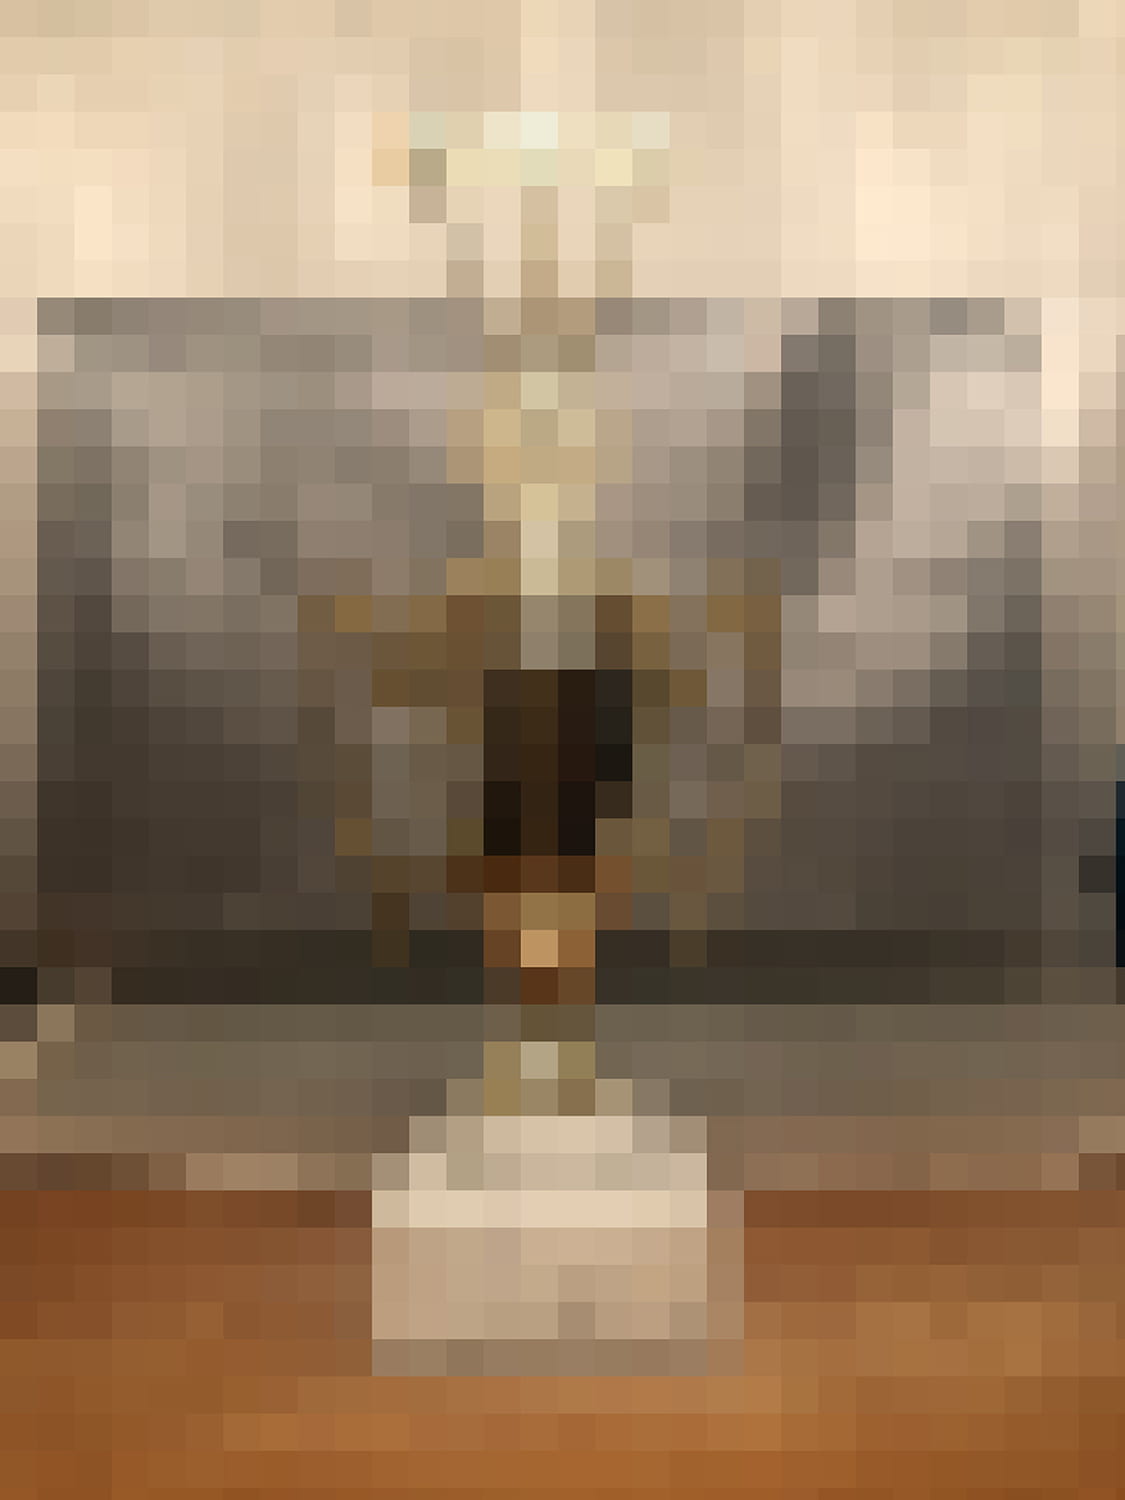 Pixelated image of a trophy